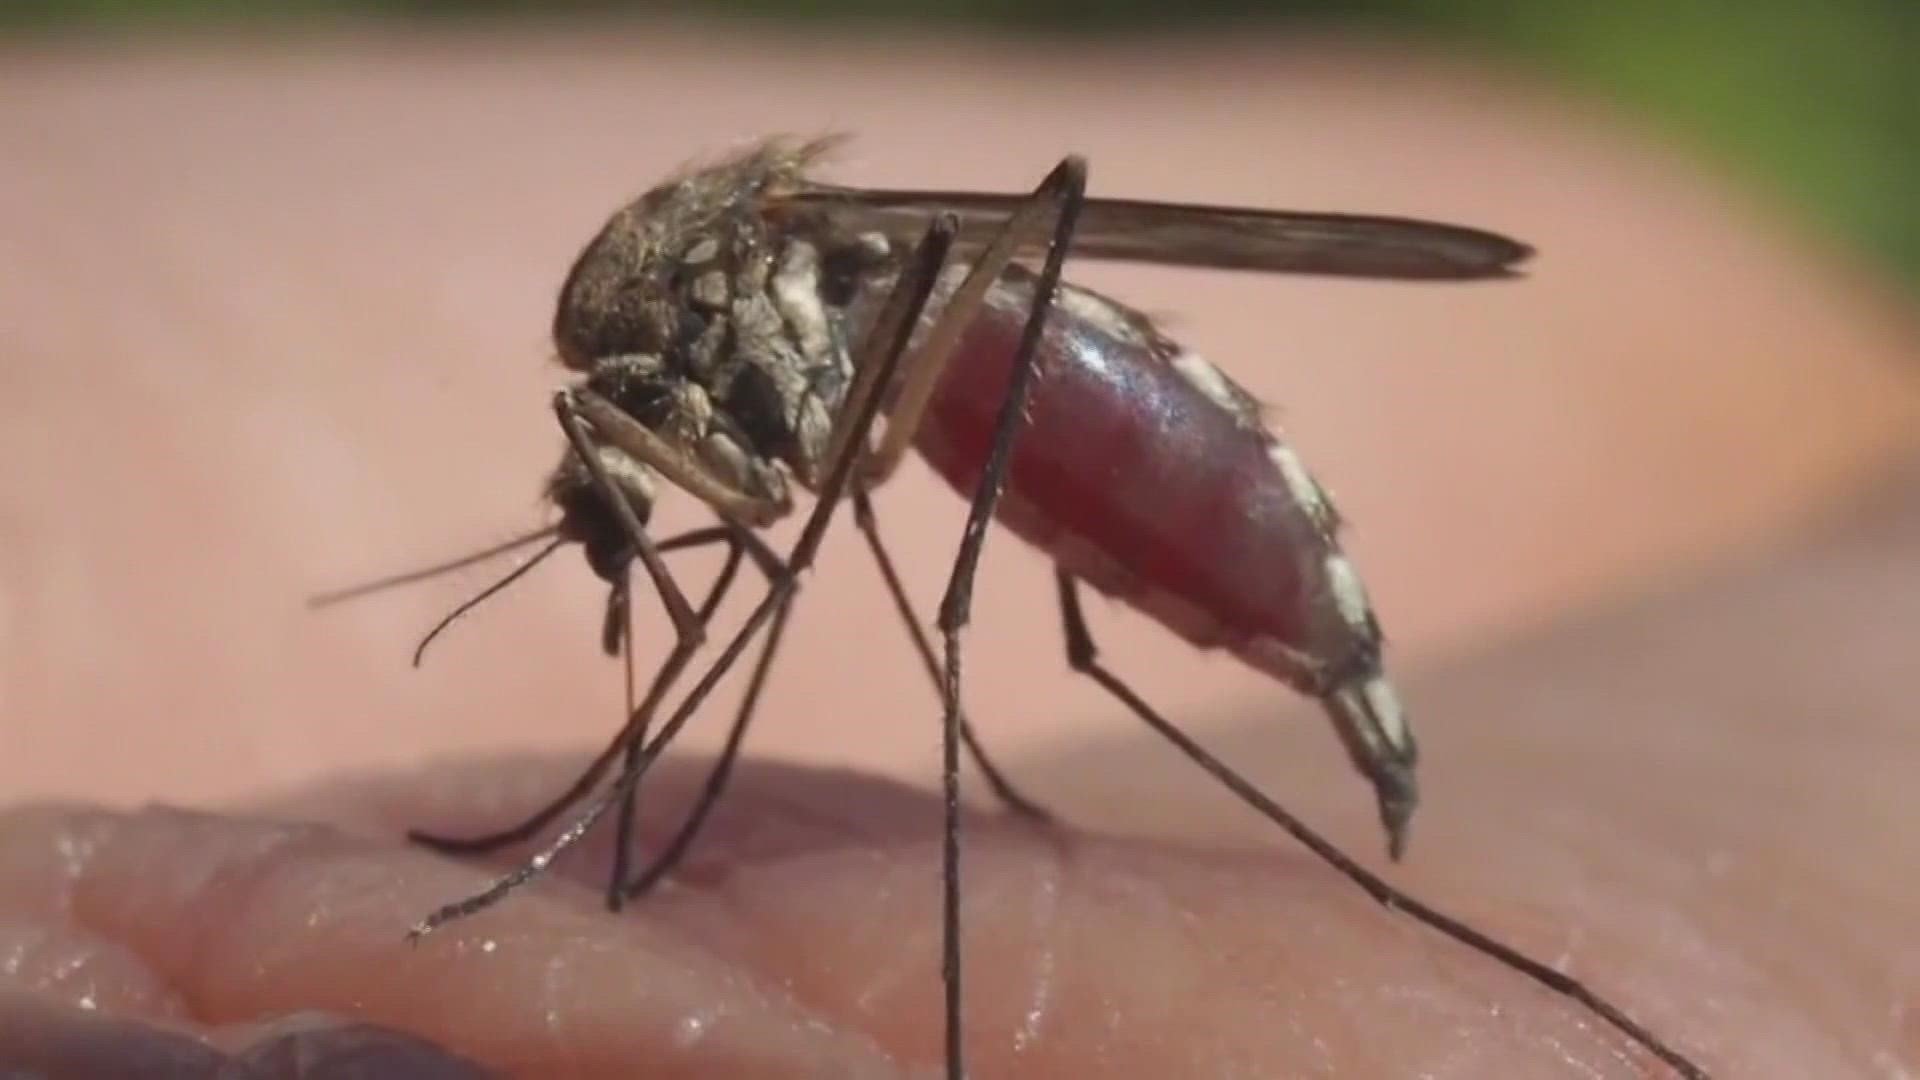 Most West Nile Virus cases are reported in August and September, according to the Colorado Department of Public Health and Environment.